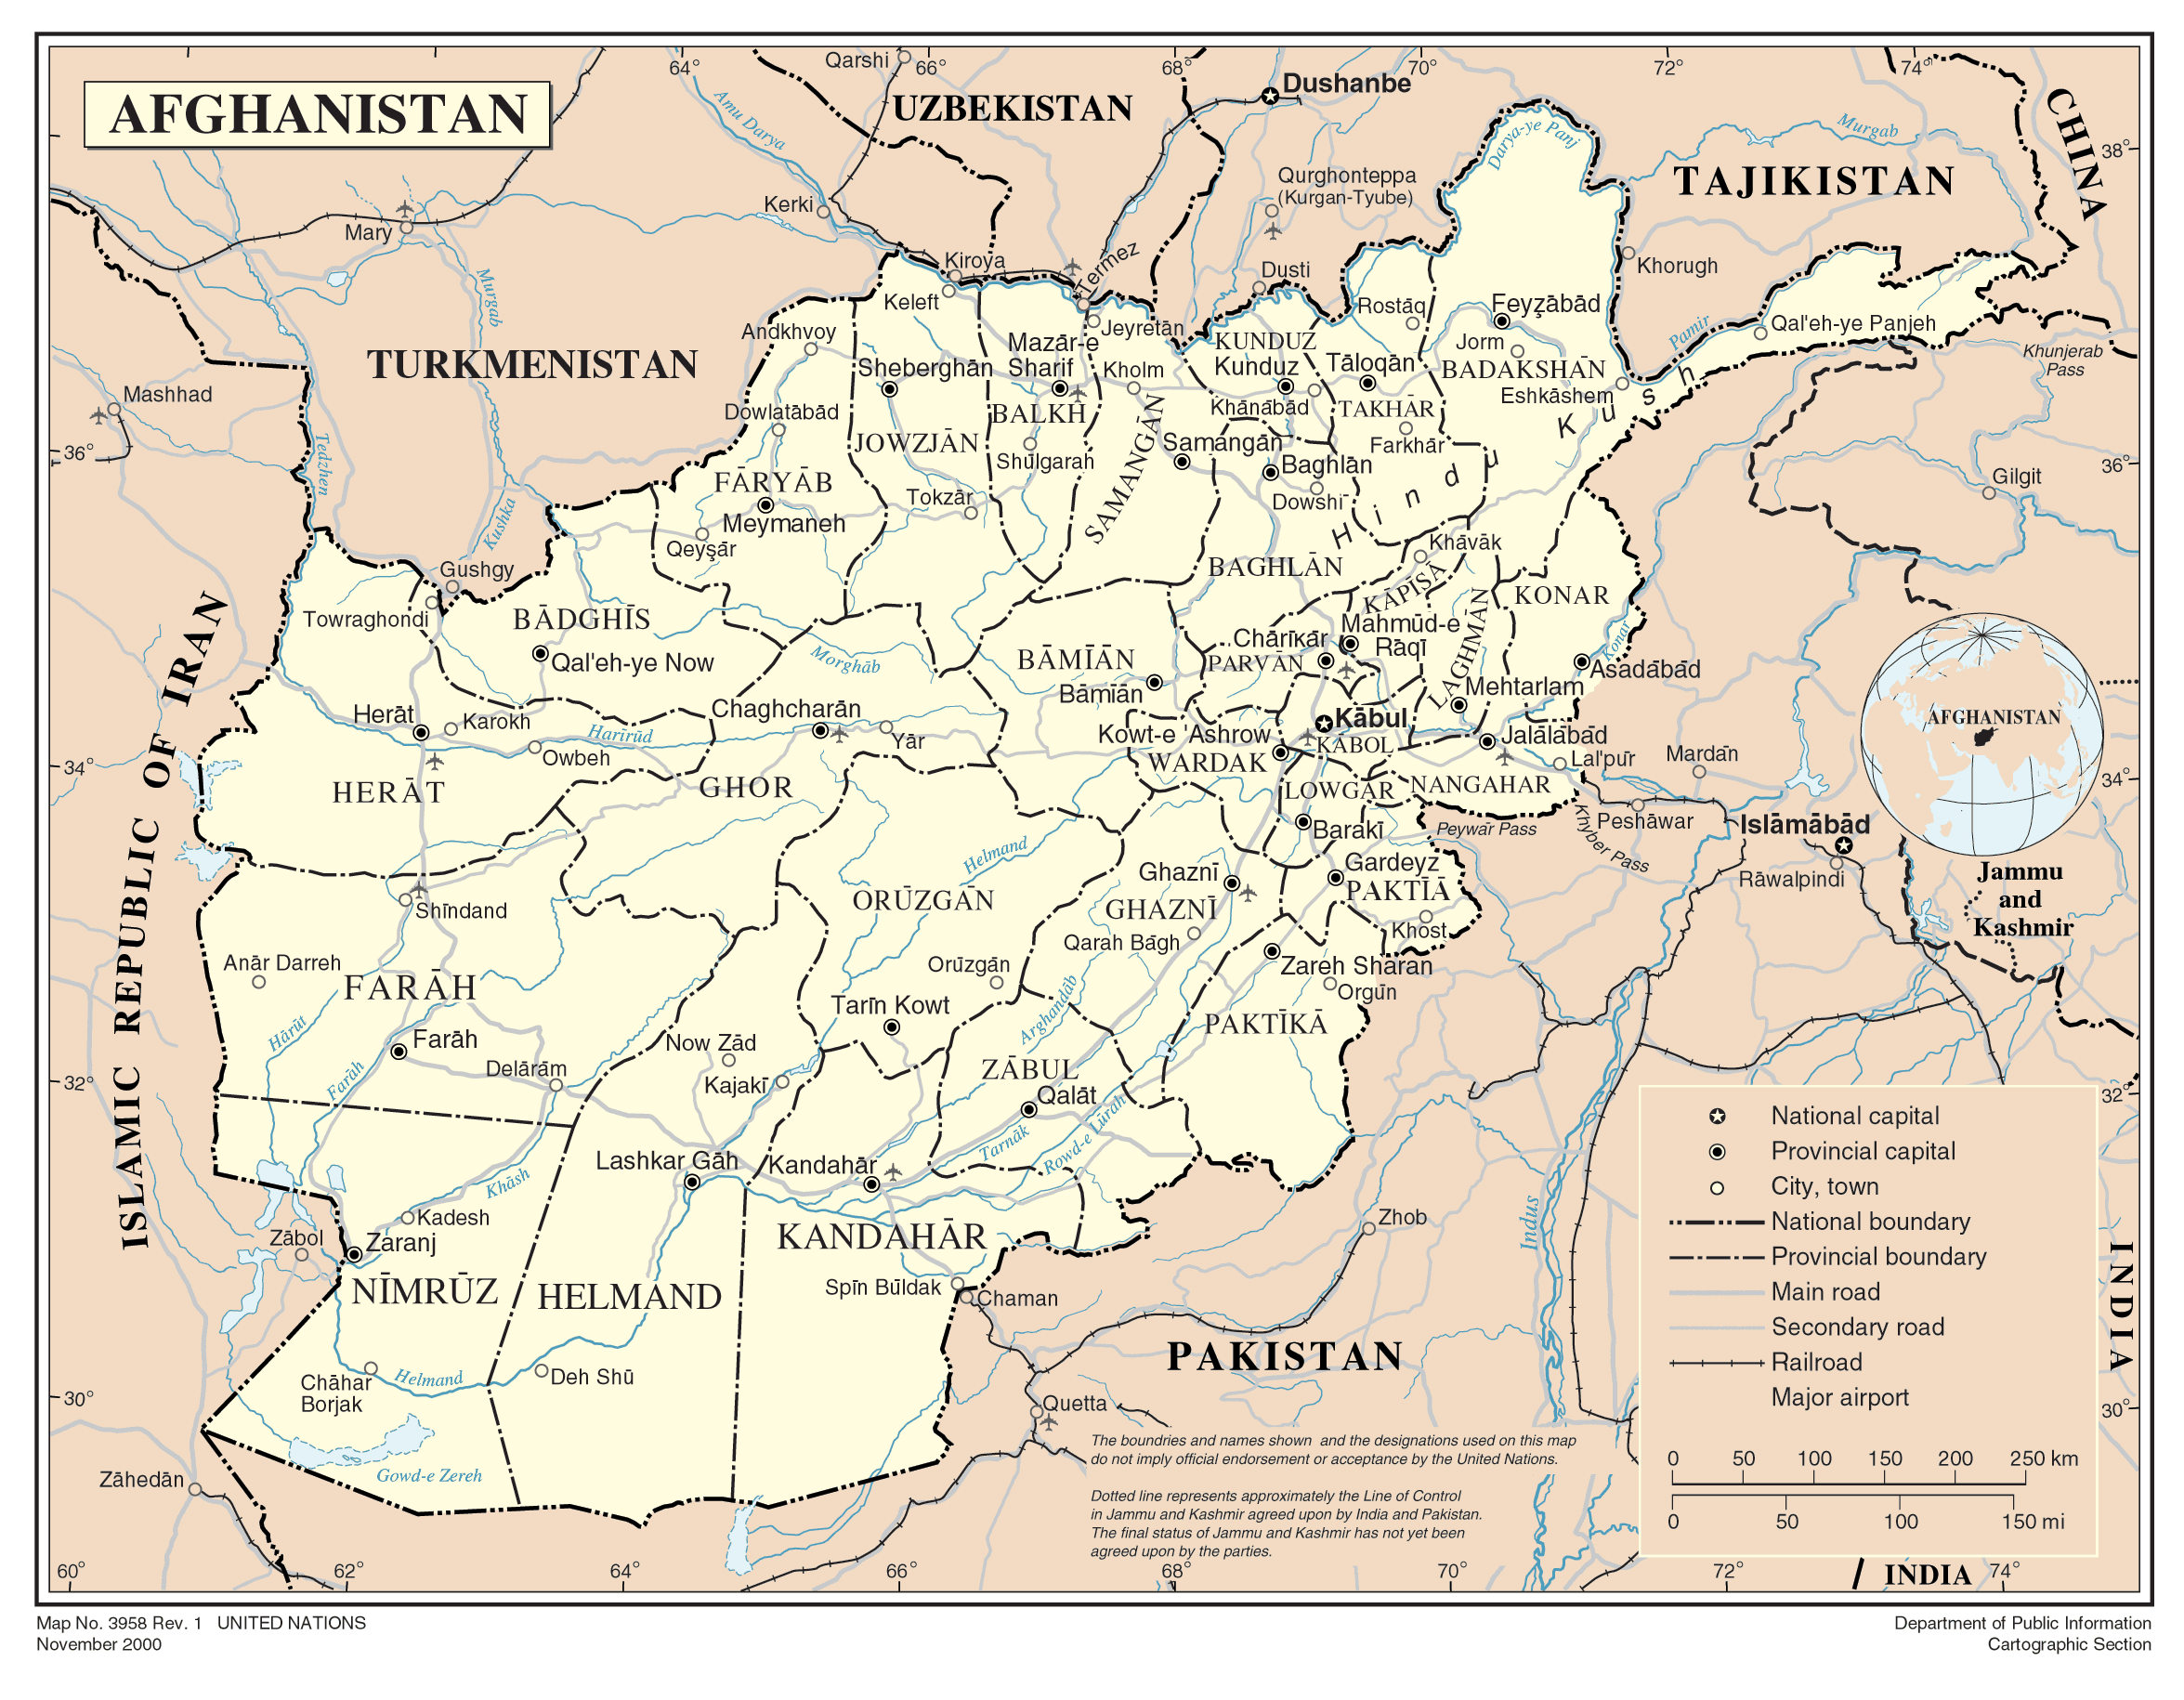 Afghanistan Map And Surrounding Countries